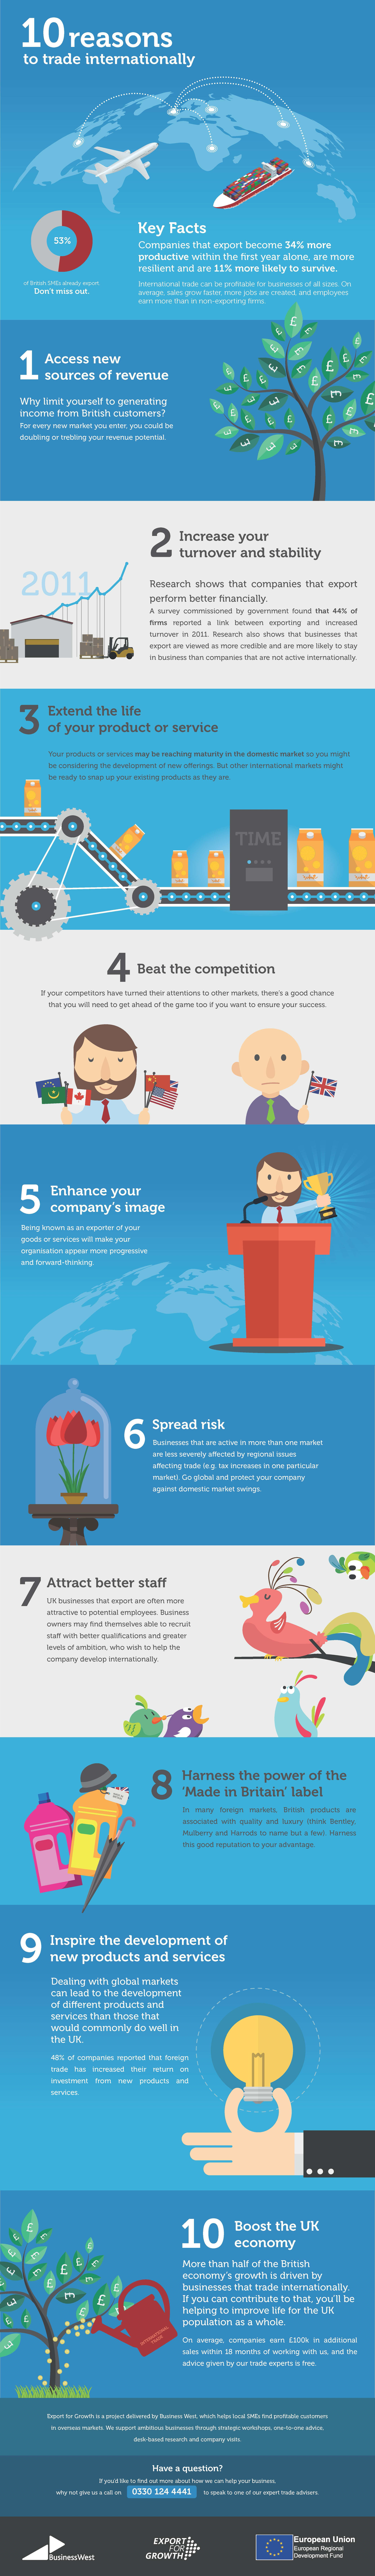 10 reasons to export [Infographic]